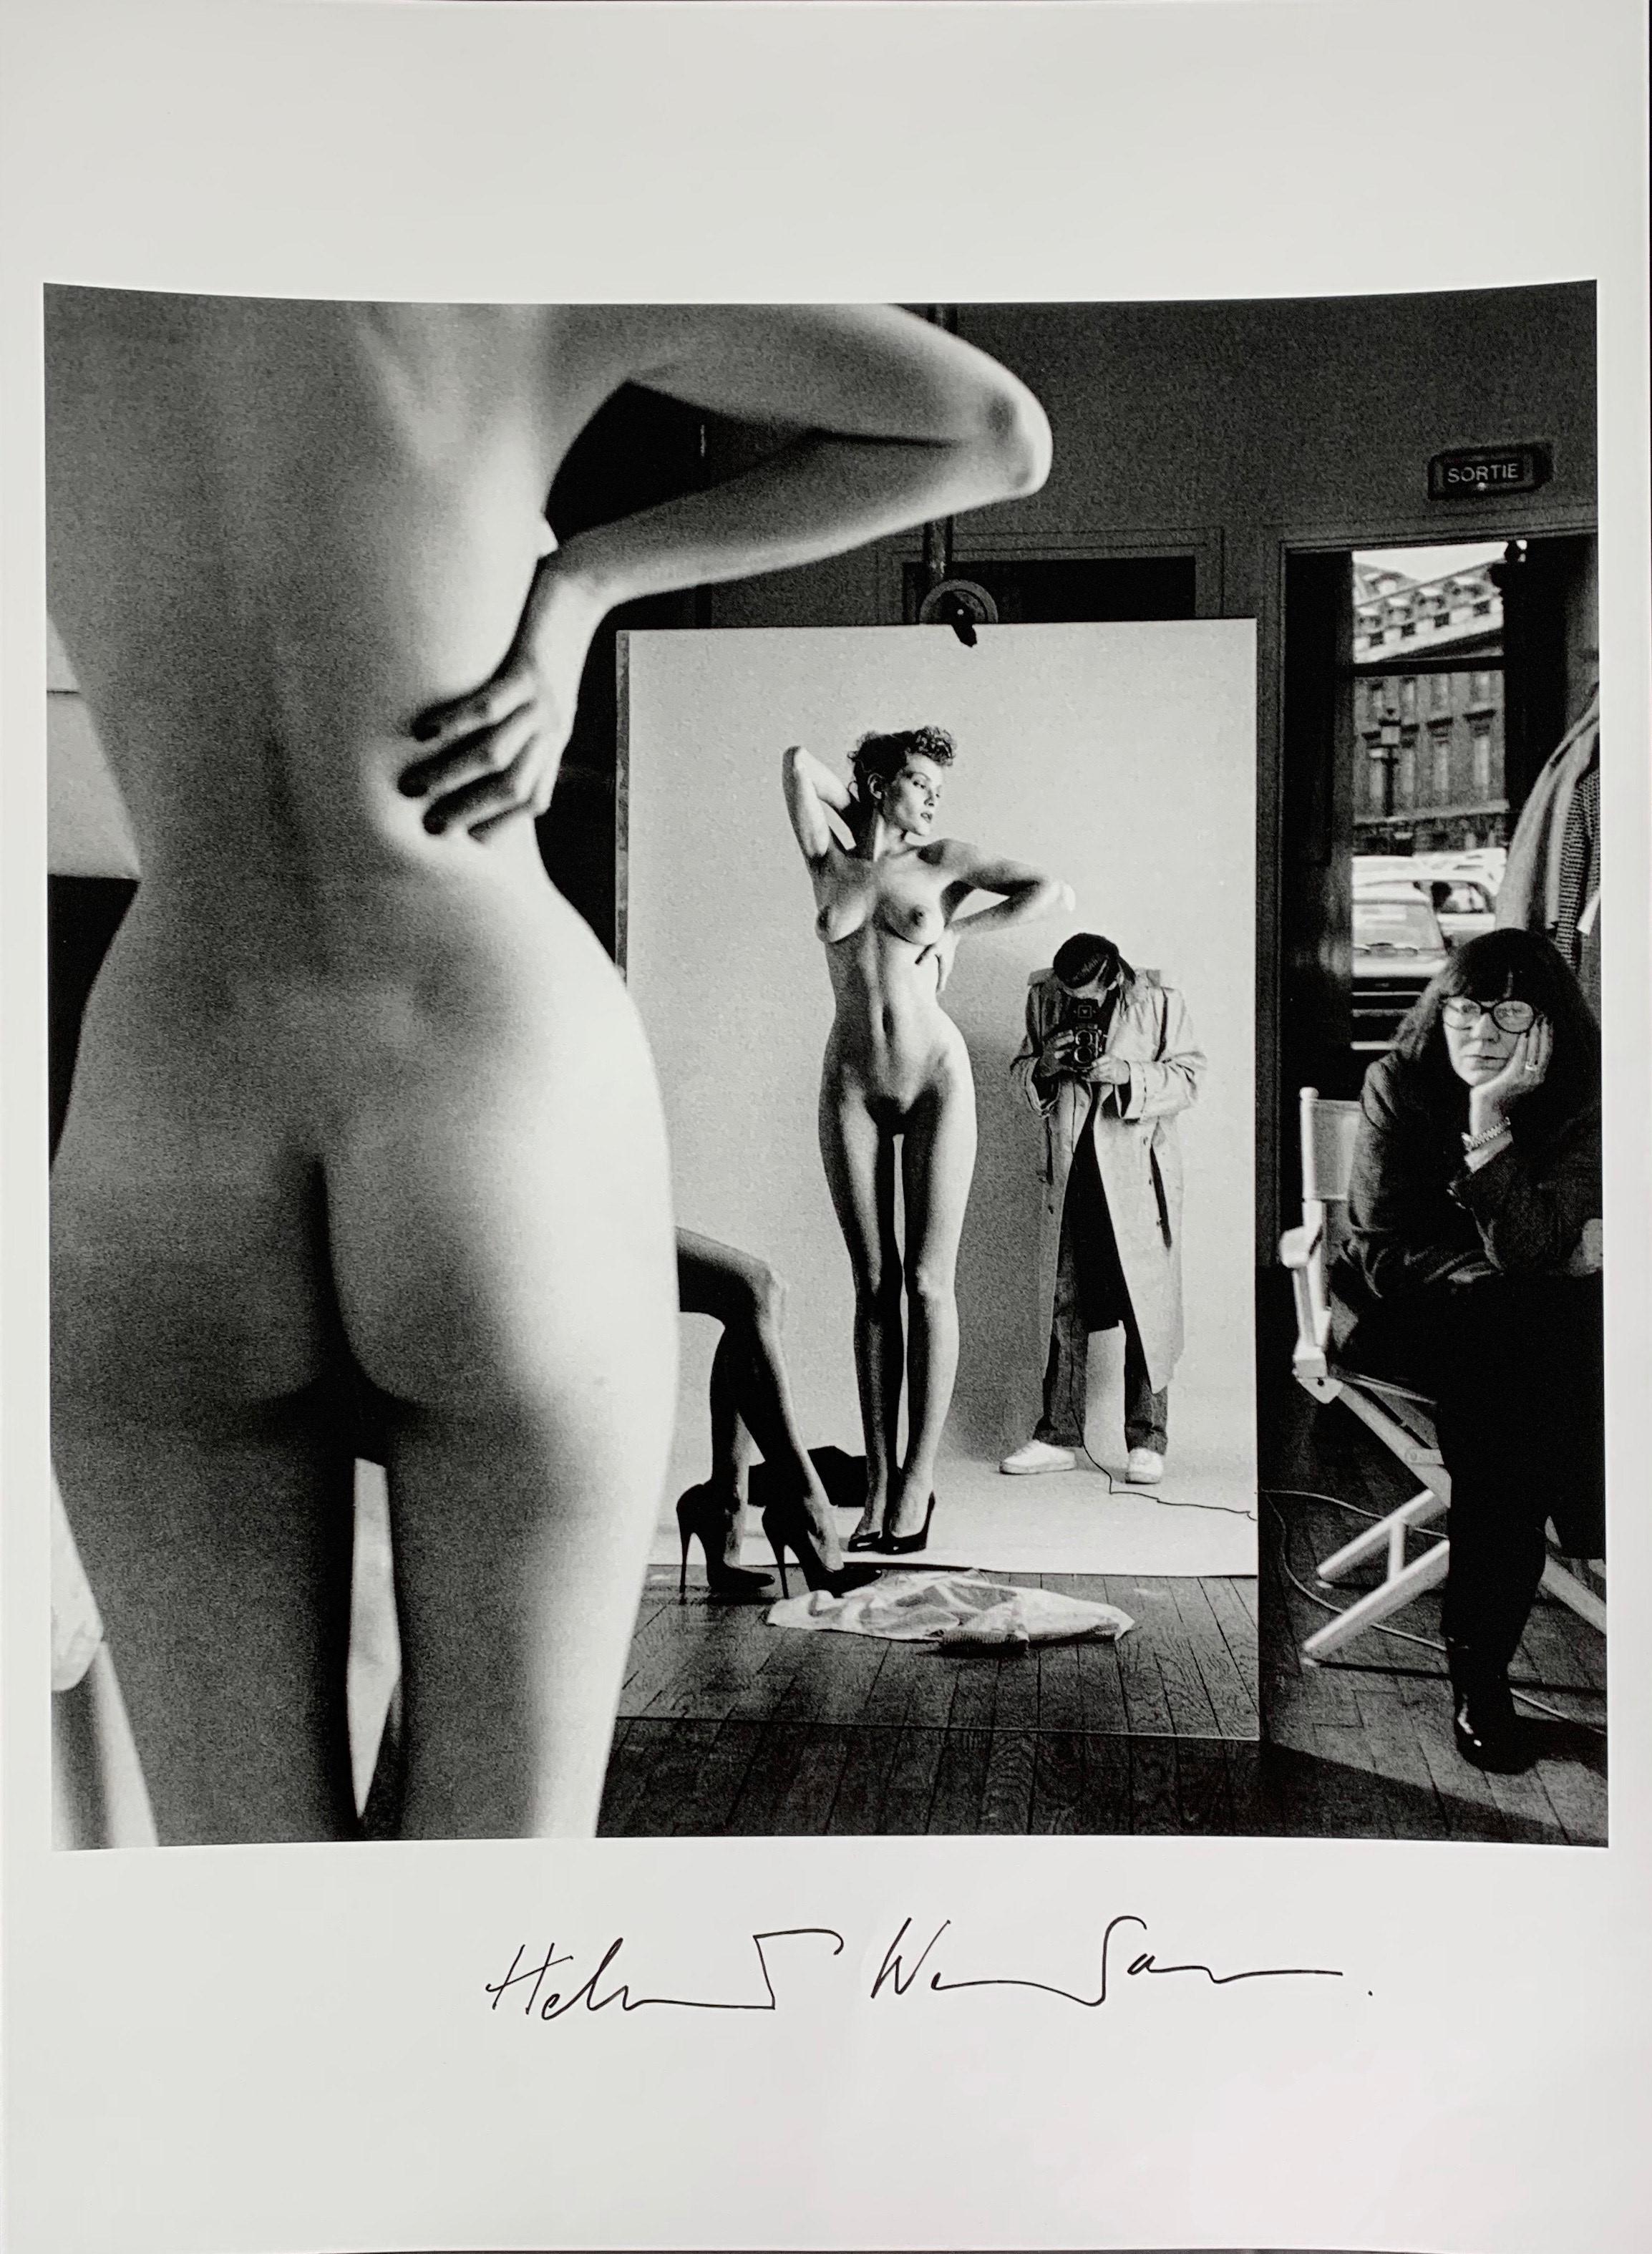 HELMUT NEWTON (1920–2004)
Self Portrait with Wife and Model, 1981
Silver gelatin print
Sheet: 20.1 x 16.1
Signed margin recto, stamped with date inscription verso
Acquired directly from artists former manager and producer of the works, Norman